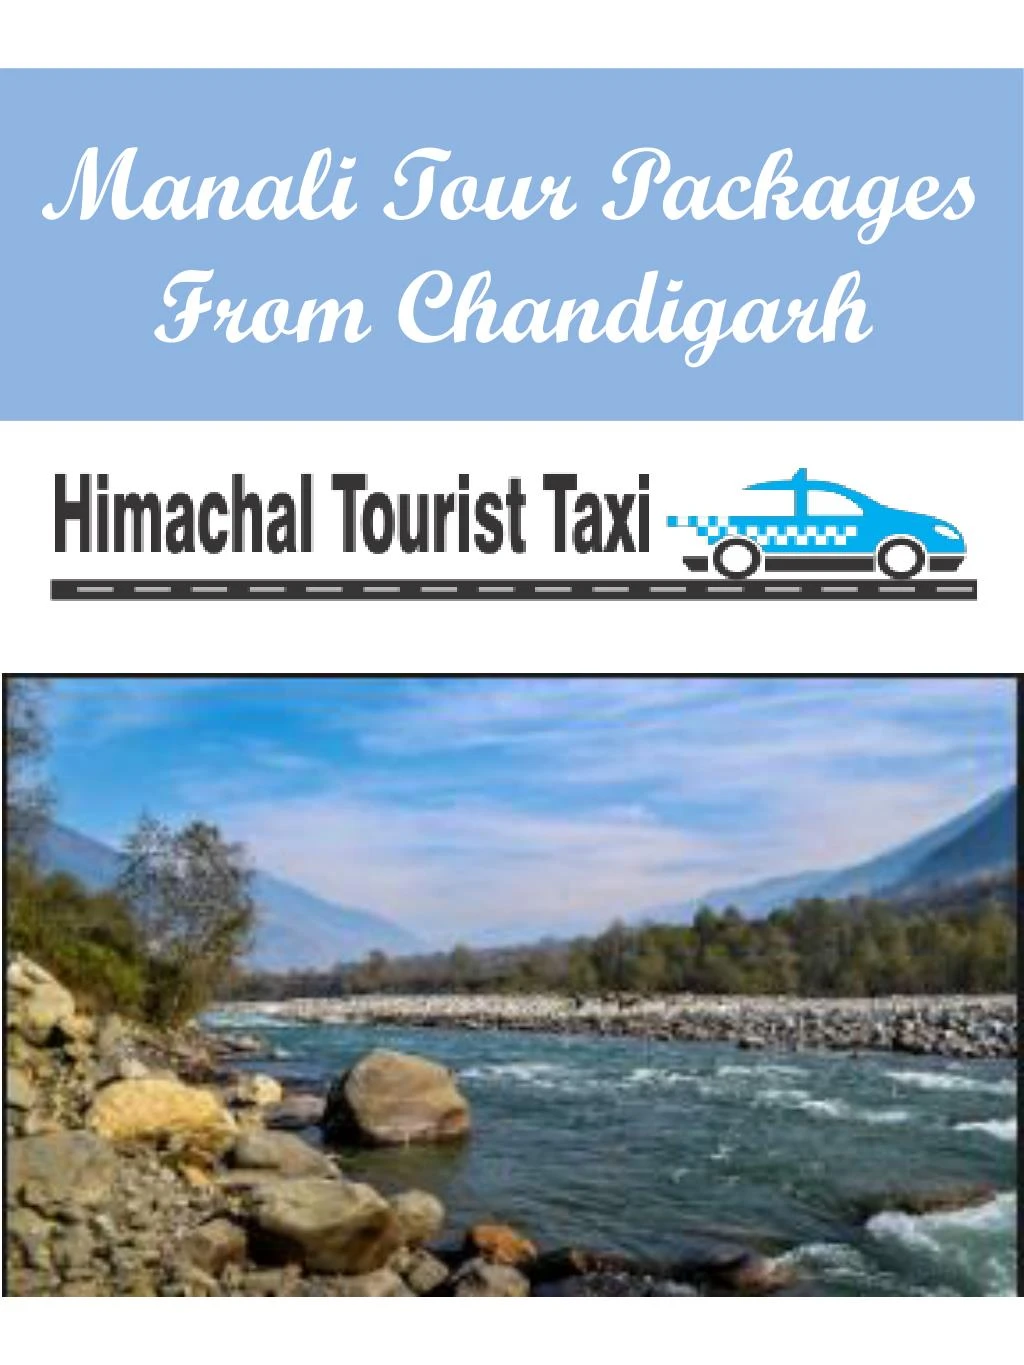 manali tour packages from chandigarh